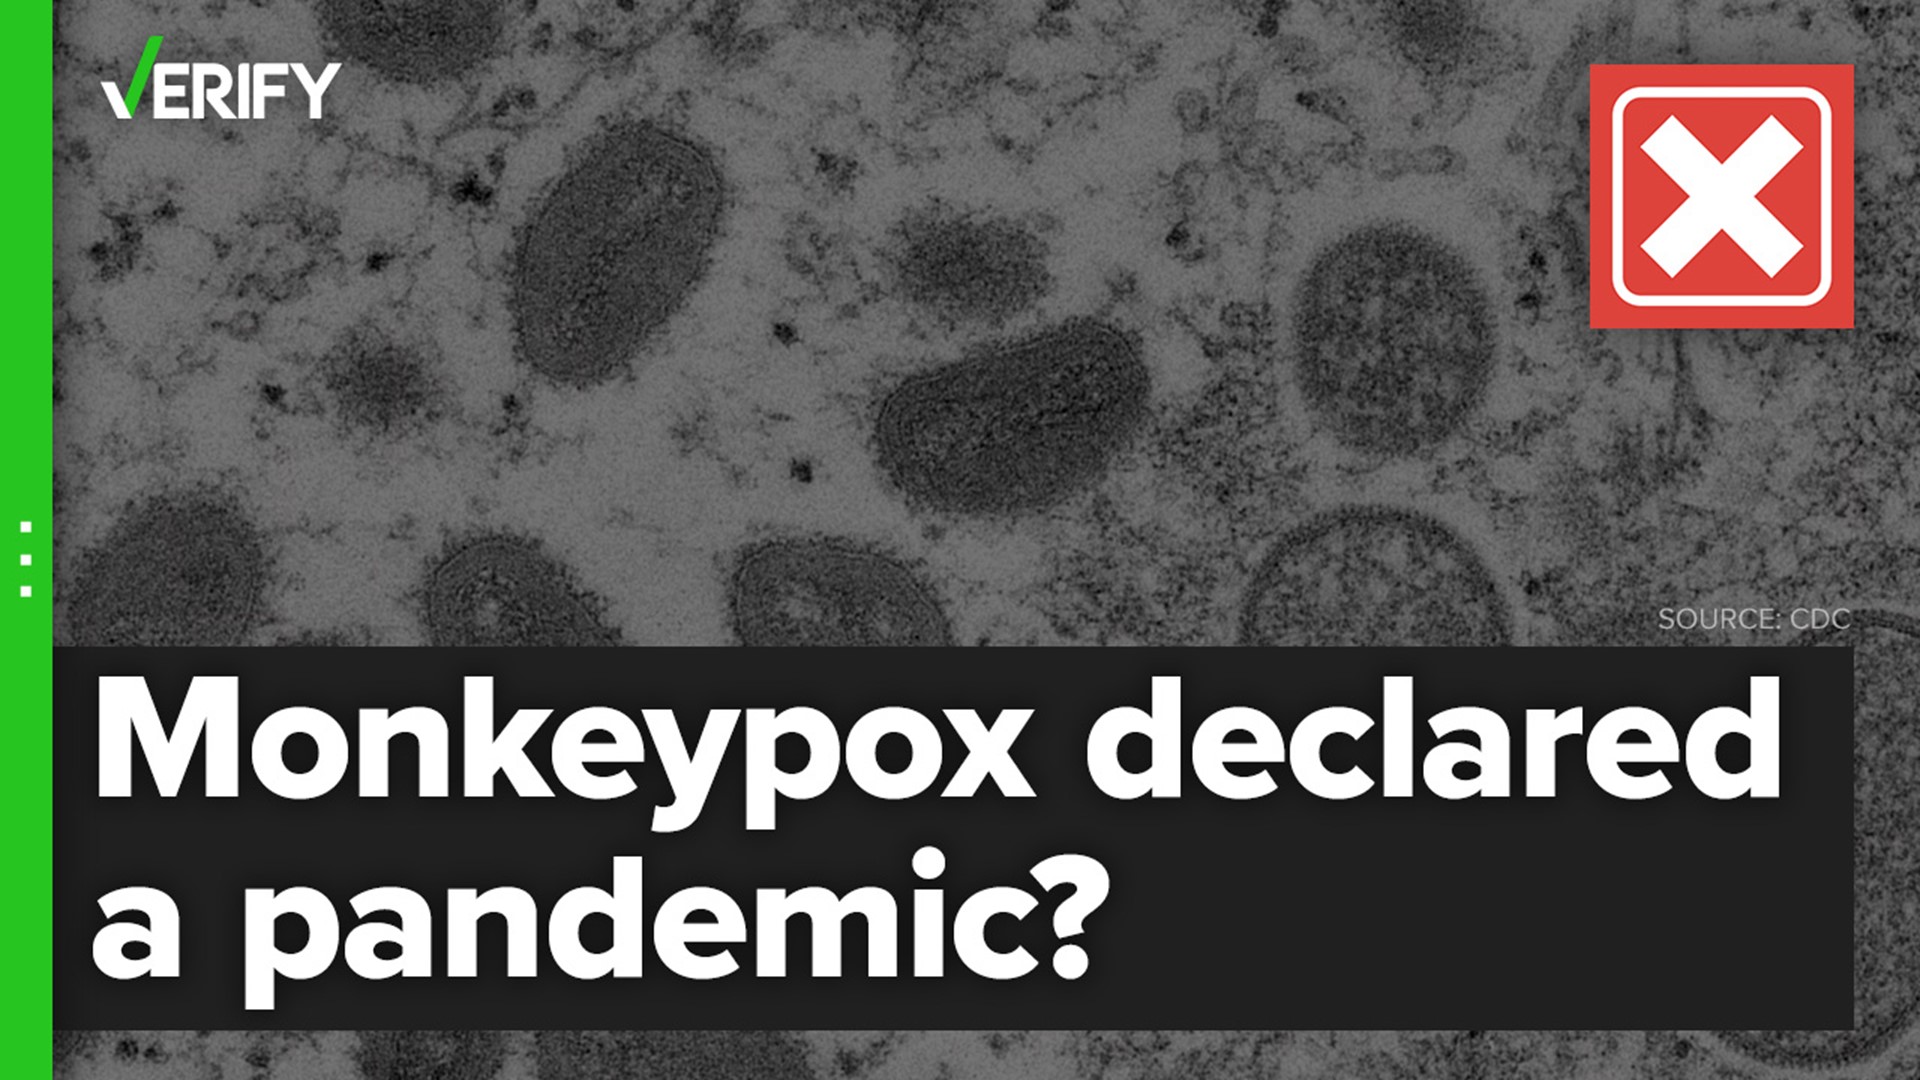 Major public health agencies, including the WHO and CDC, refer to the monkeypox situation as an “outbreak,” not a pandemic.